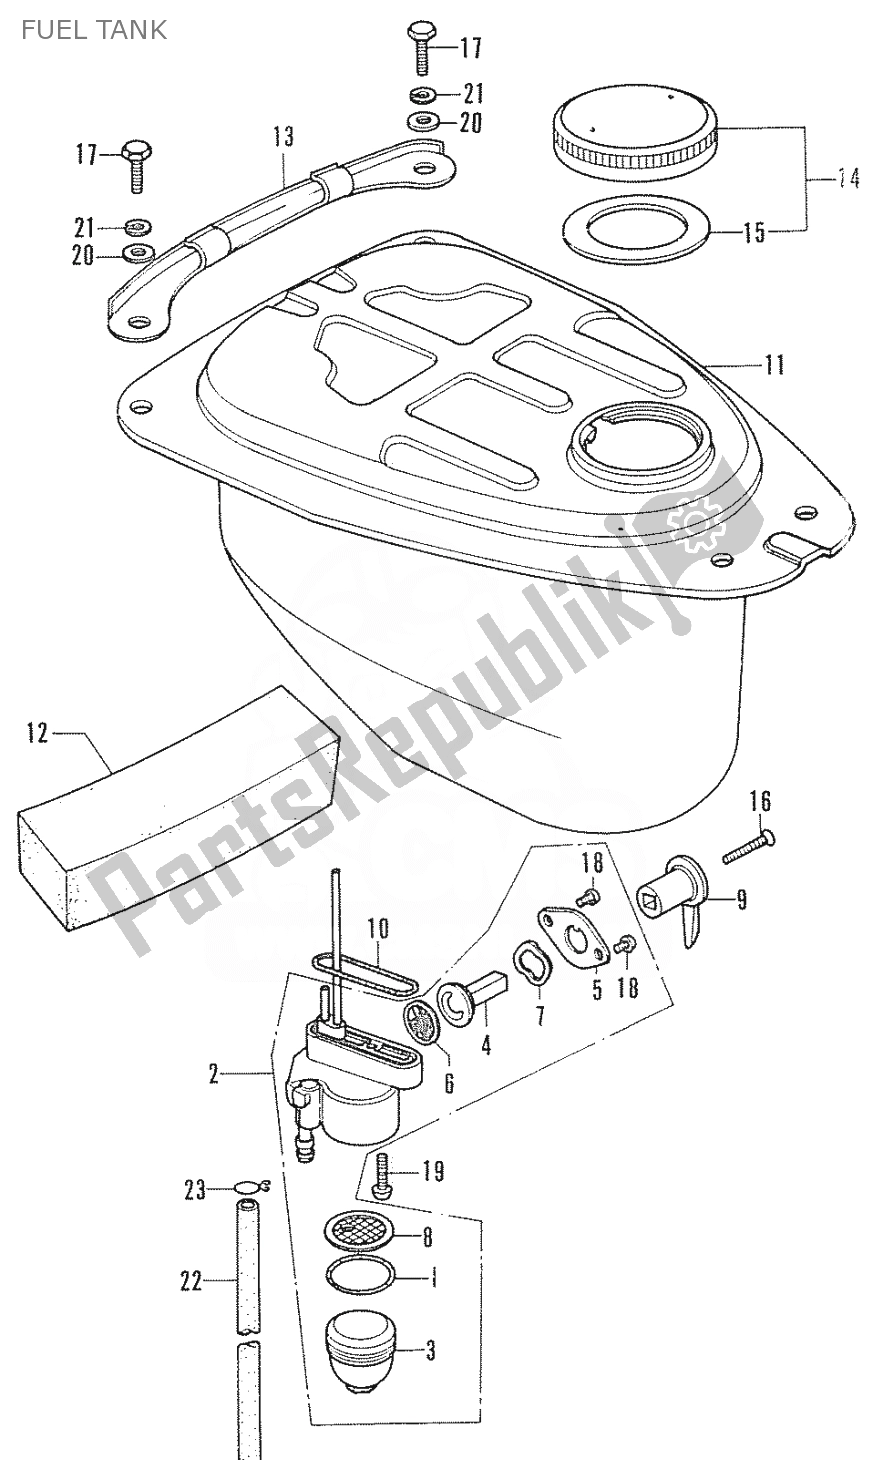 All parts for the Fuel Tank of the Honda CF 70 Chaly 1950 - 2023